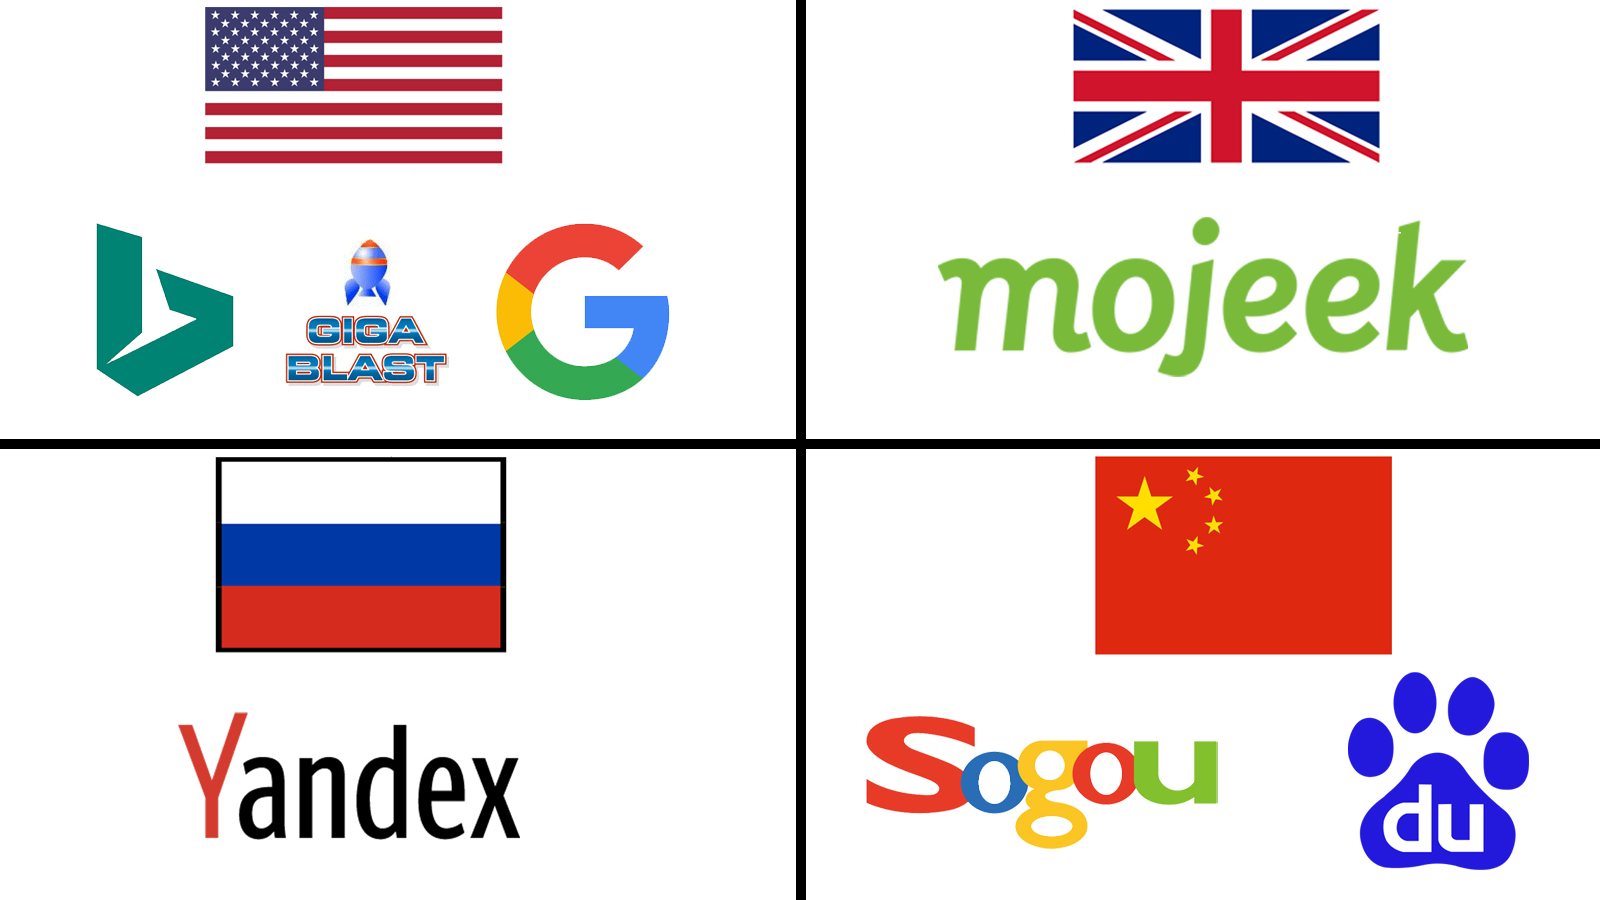 Image 1 Countries.png